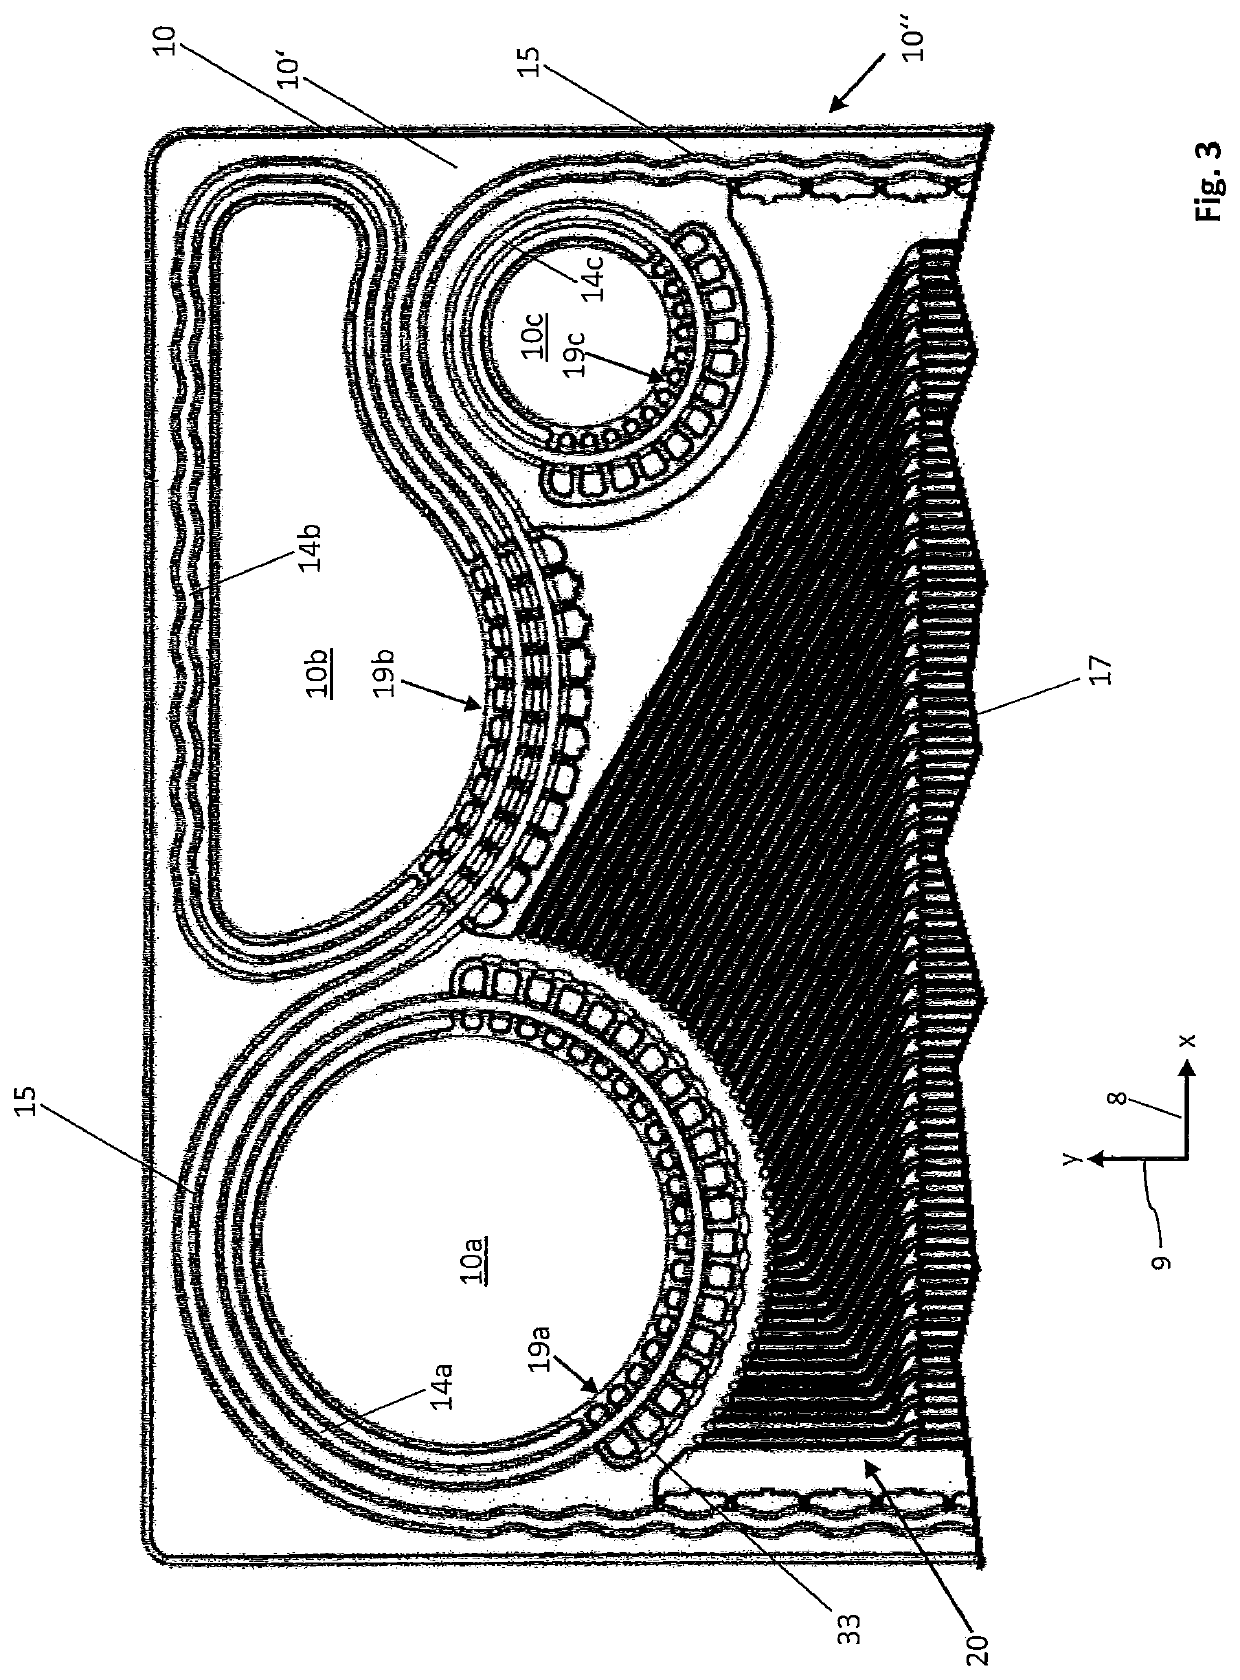 Separator plate for an electrochemical system